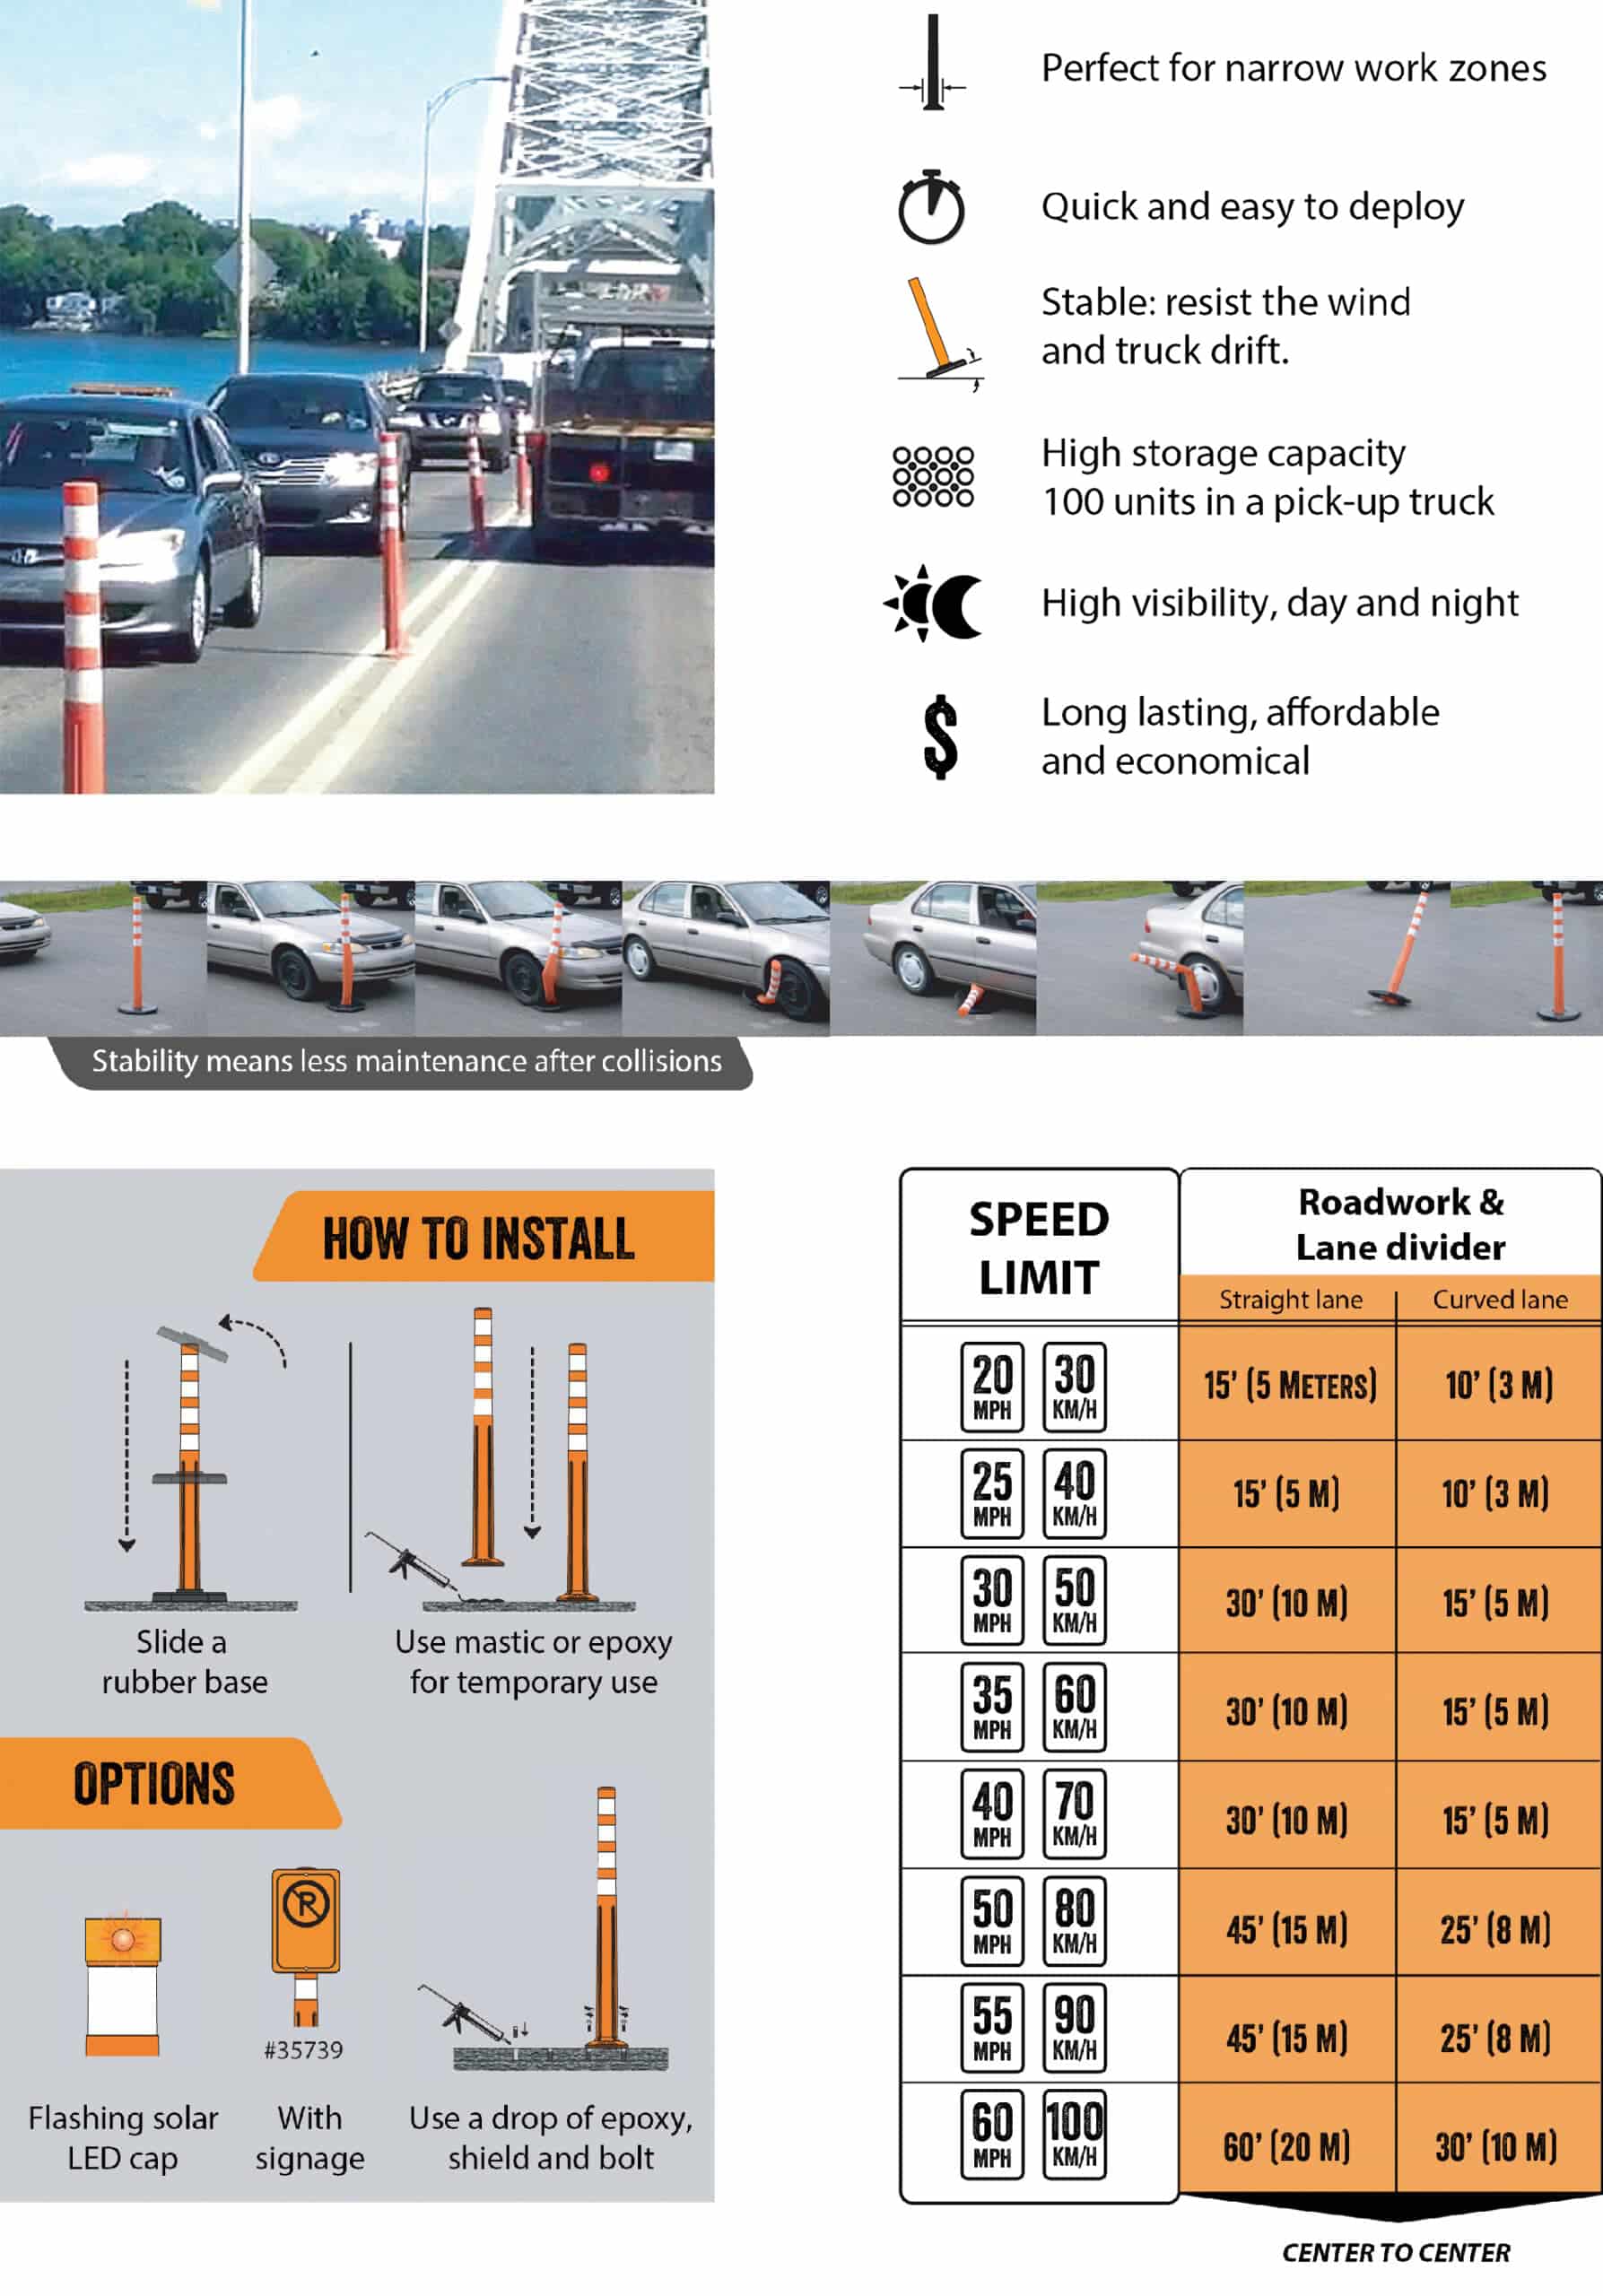 The multiples installations for the DEFLEX B-TRV-10 flexible delineator for road work - DEFLEX Bollards and delineators - Traffic Innovation